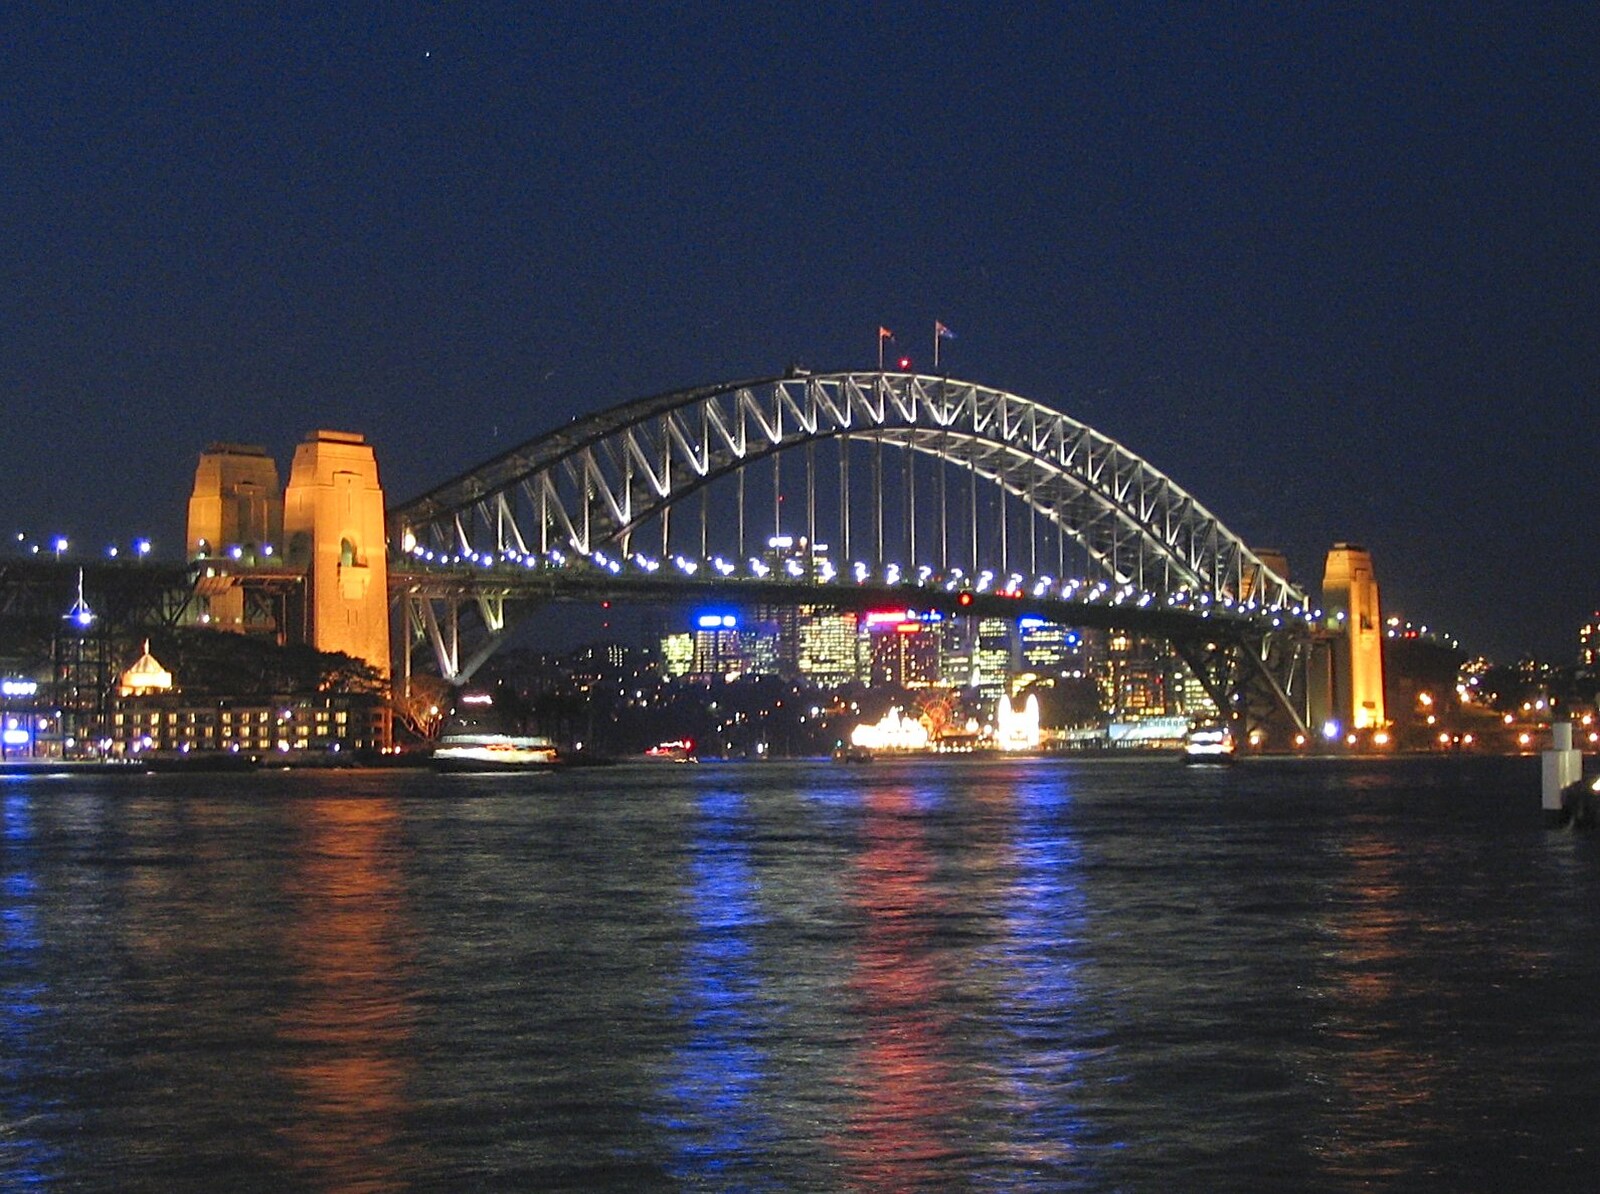 The harbour bridge from Sydney, New South Wales, Australia - 10th October 2004